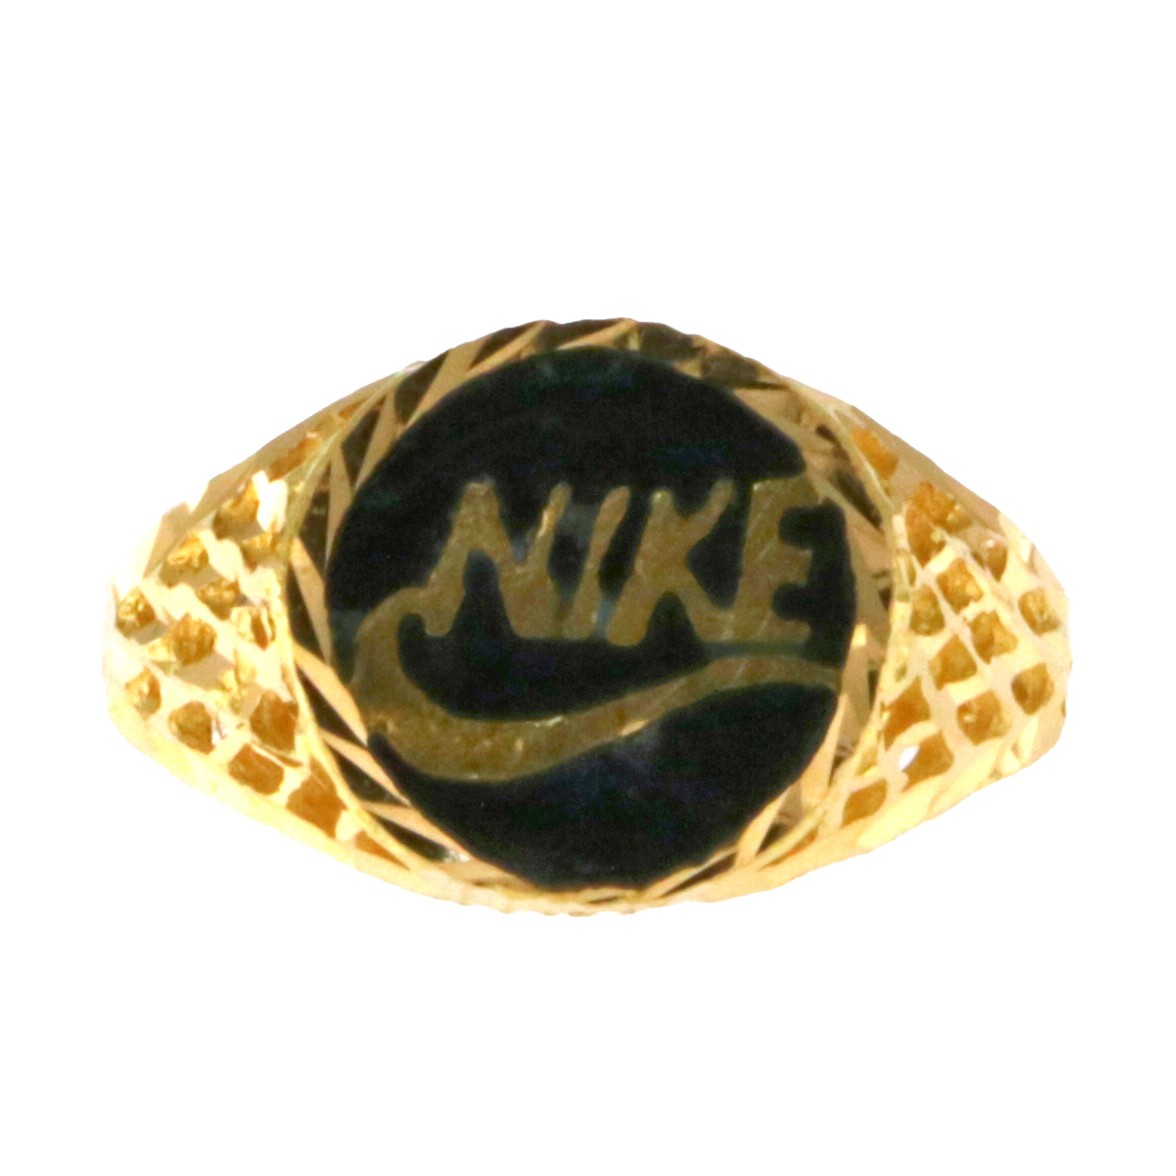 Indian Baby Nike Ring (Pre-Owned)